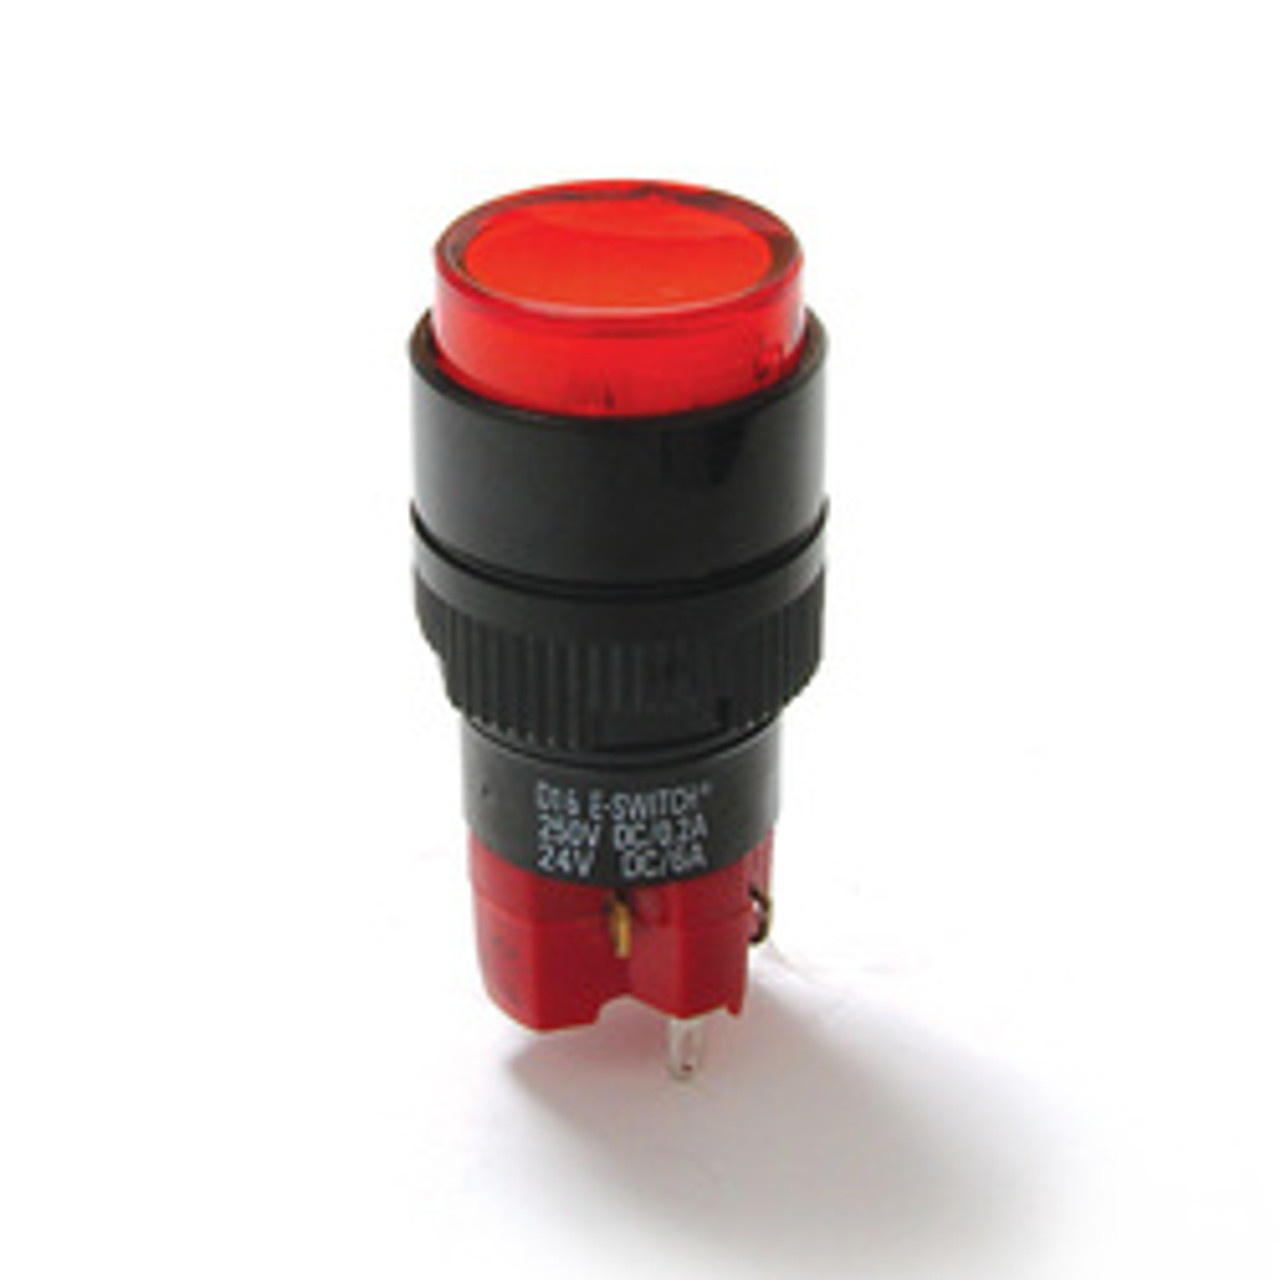 E-Switch D16OAT12HGRNGRN Pushbutton Switches